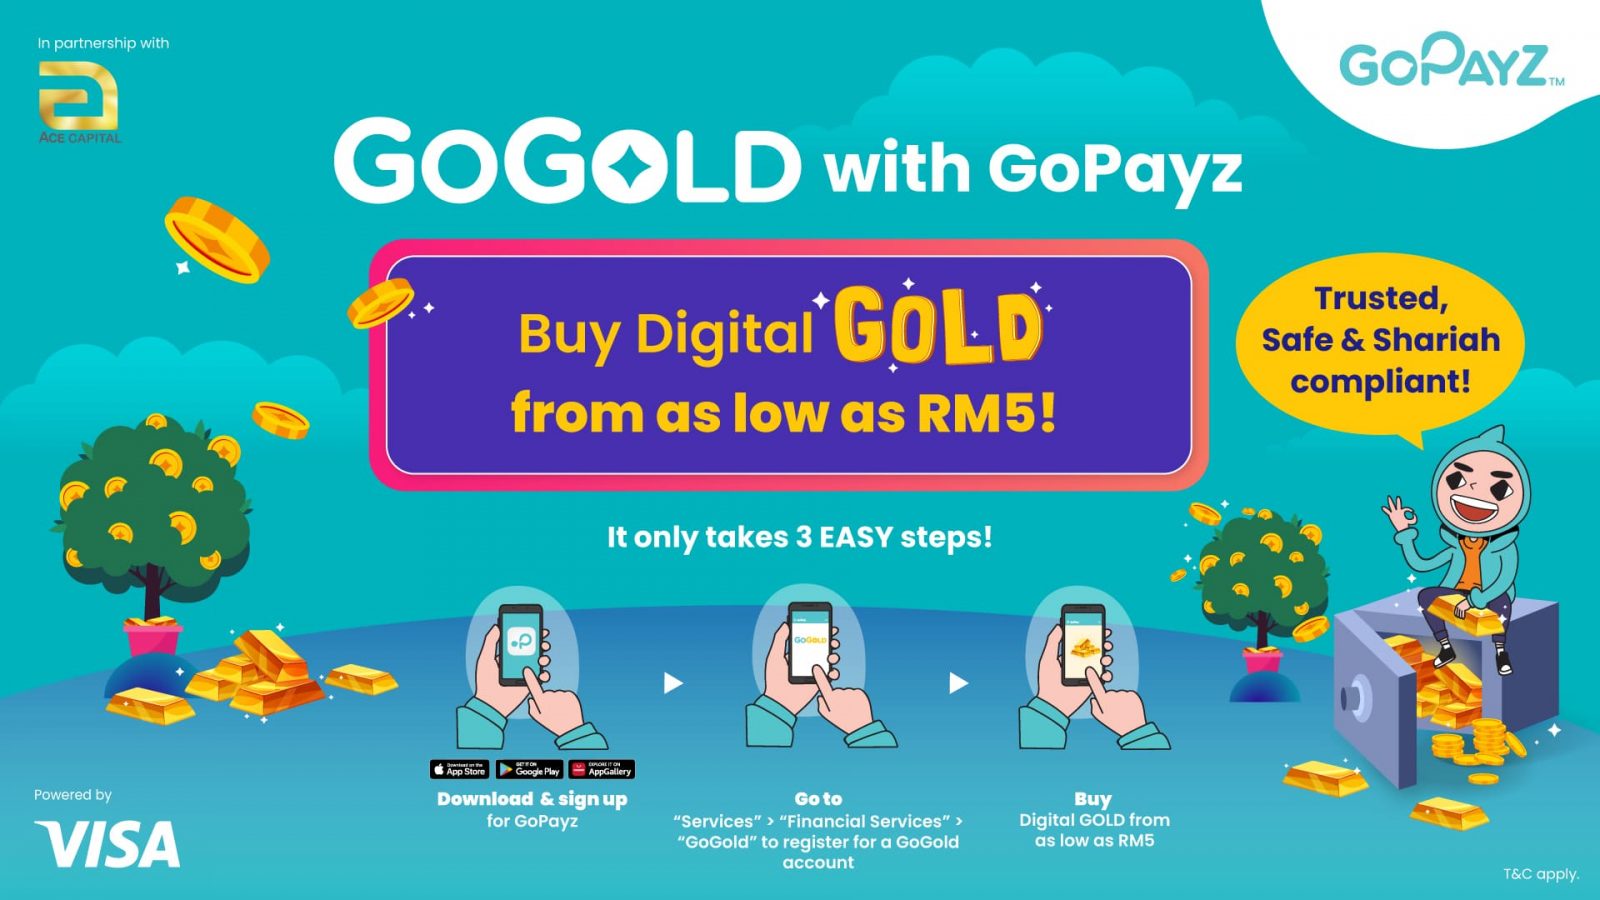 GoGold is a new feature in GoPayz, which allows users to purchase digital gold easily.